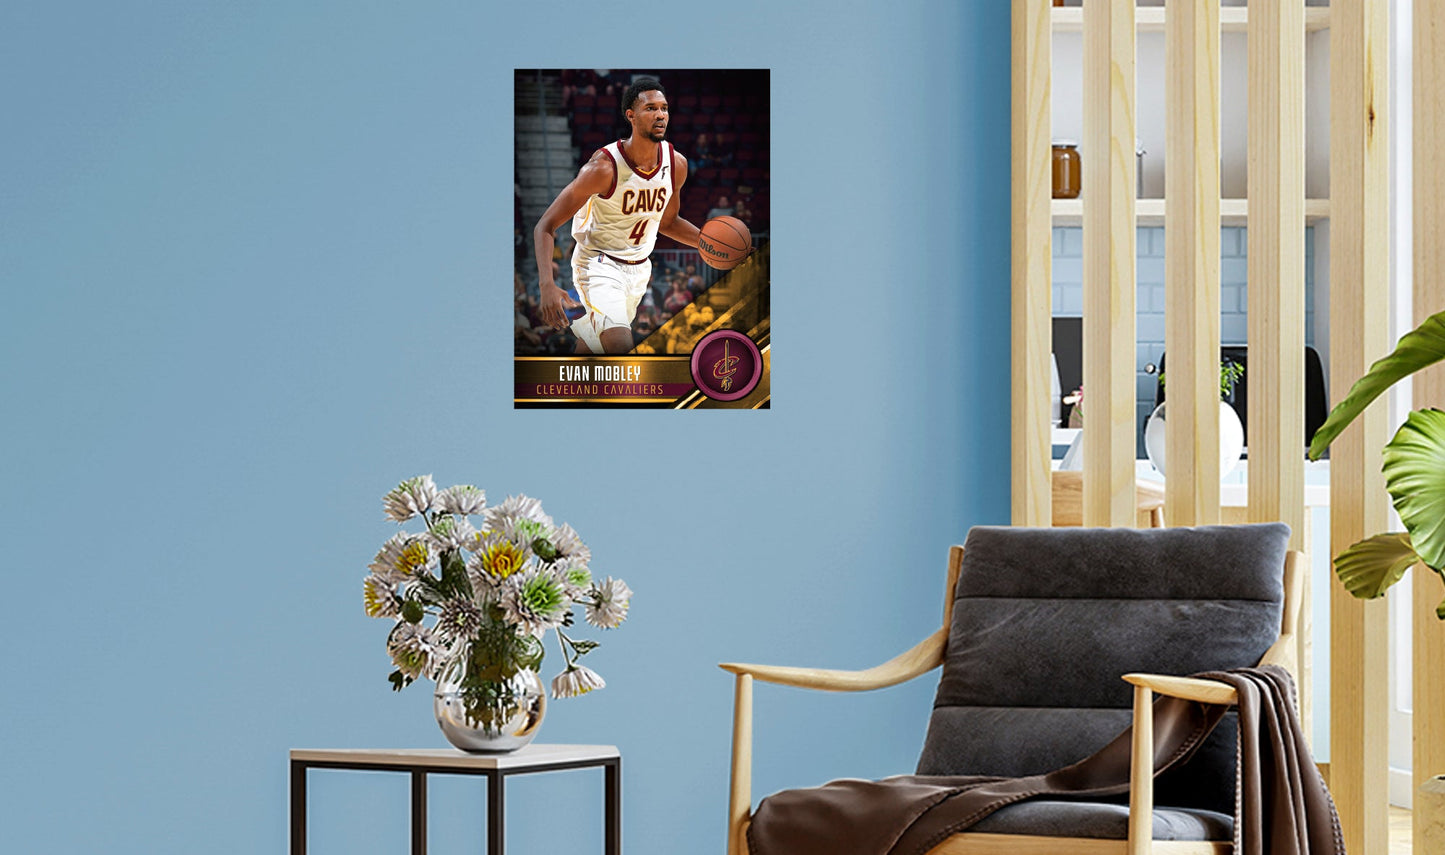 Cleveland Cavaliers: Evan Mobley Poster - Officially Licensed NBA Removable Adhesive Decal